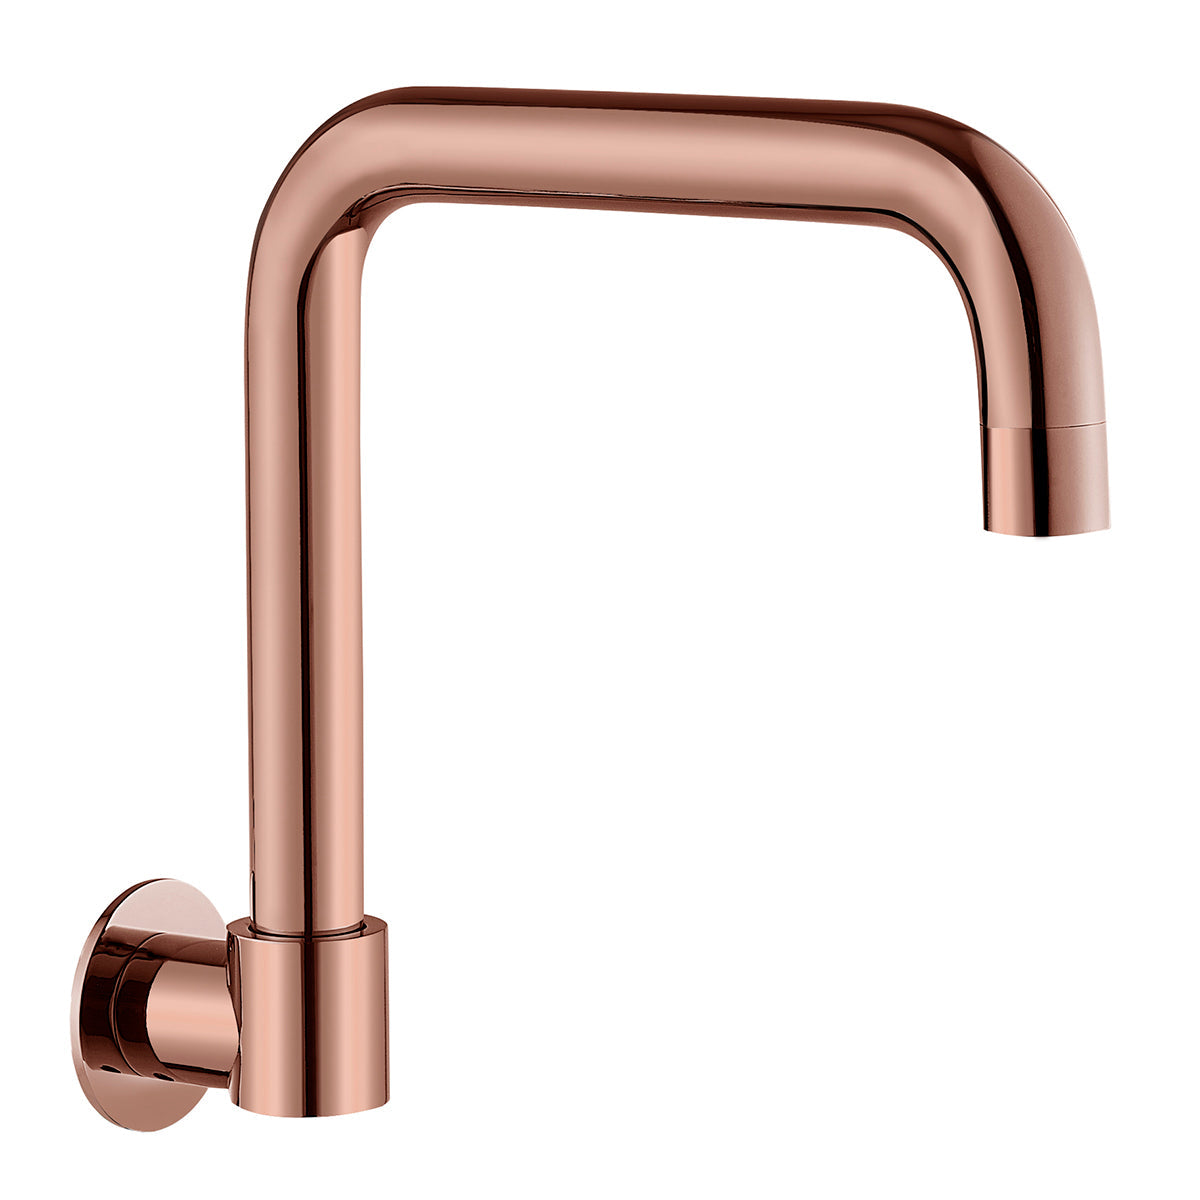 CS27-6L (RG) / Ideal Swivel Wall Outlet (Rose Gold) - Hellycar Rose Gold Swivel Spout for Kitchen Sink or Laundry Sink